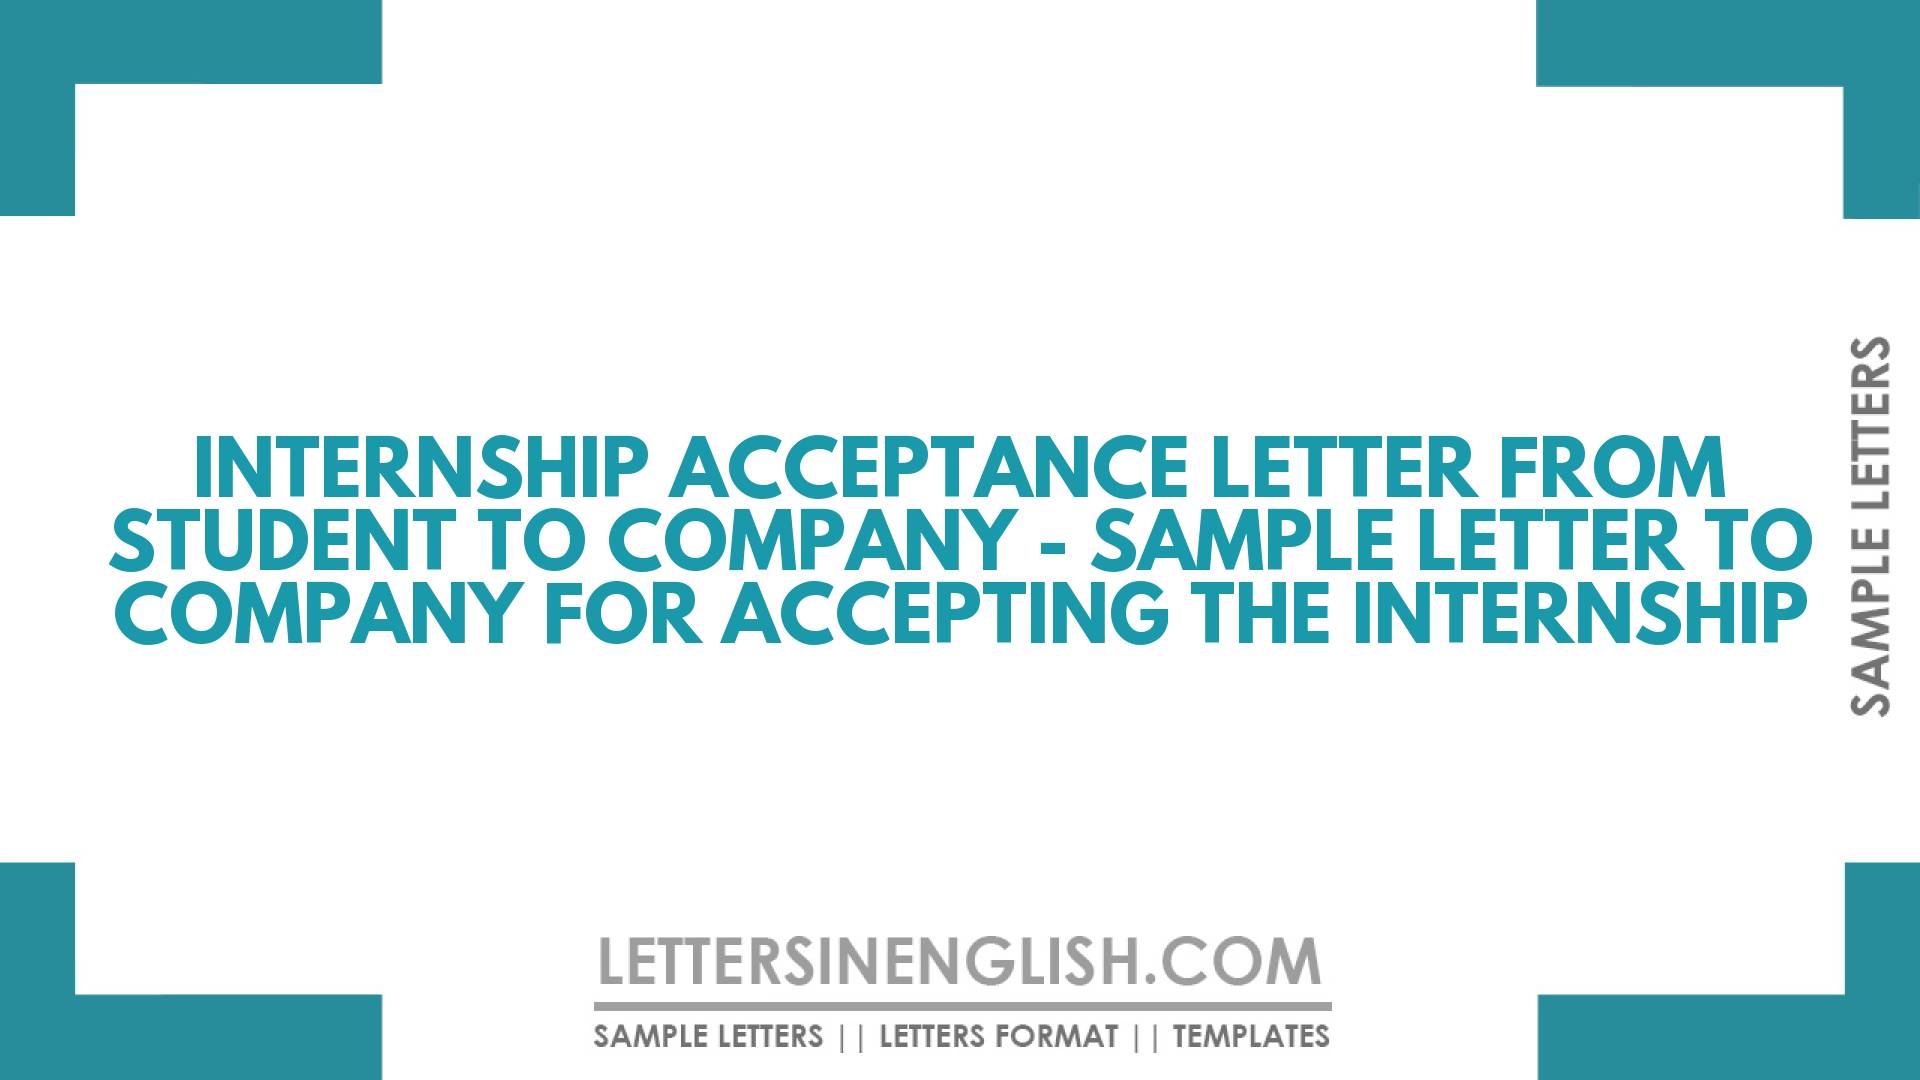 Internship Acceptance Letter from Student to Company – Sample Letter to Company for Accepting the Internship